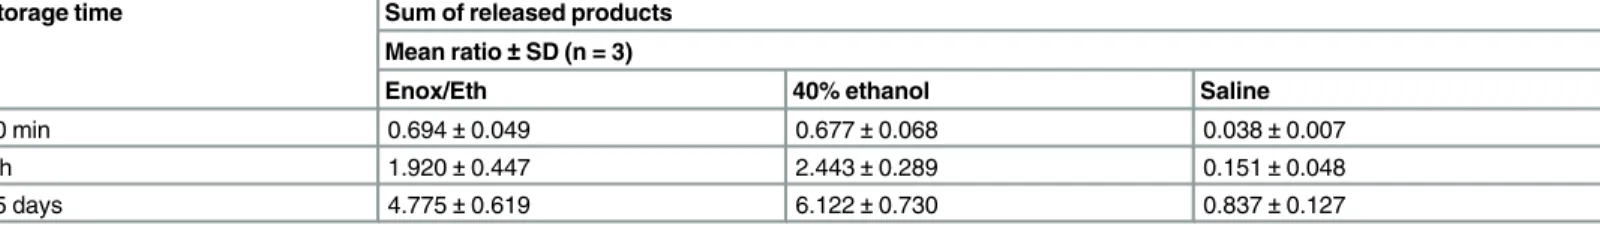 Table 4. Mean ratios ± standard deviations (SD) of the sum of released products observed following immersion of Carbothane 1 catheters (n = 3) in the mixing solutions of Enox/Eth, 40% ethanol and saline for storage times of 30 min, 4 hours and 15 days.